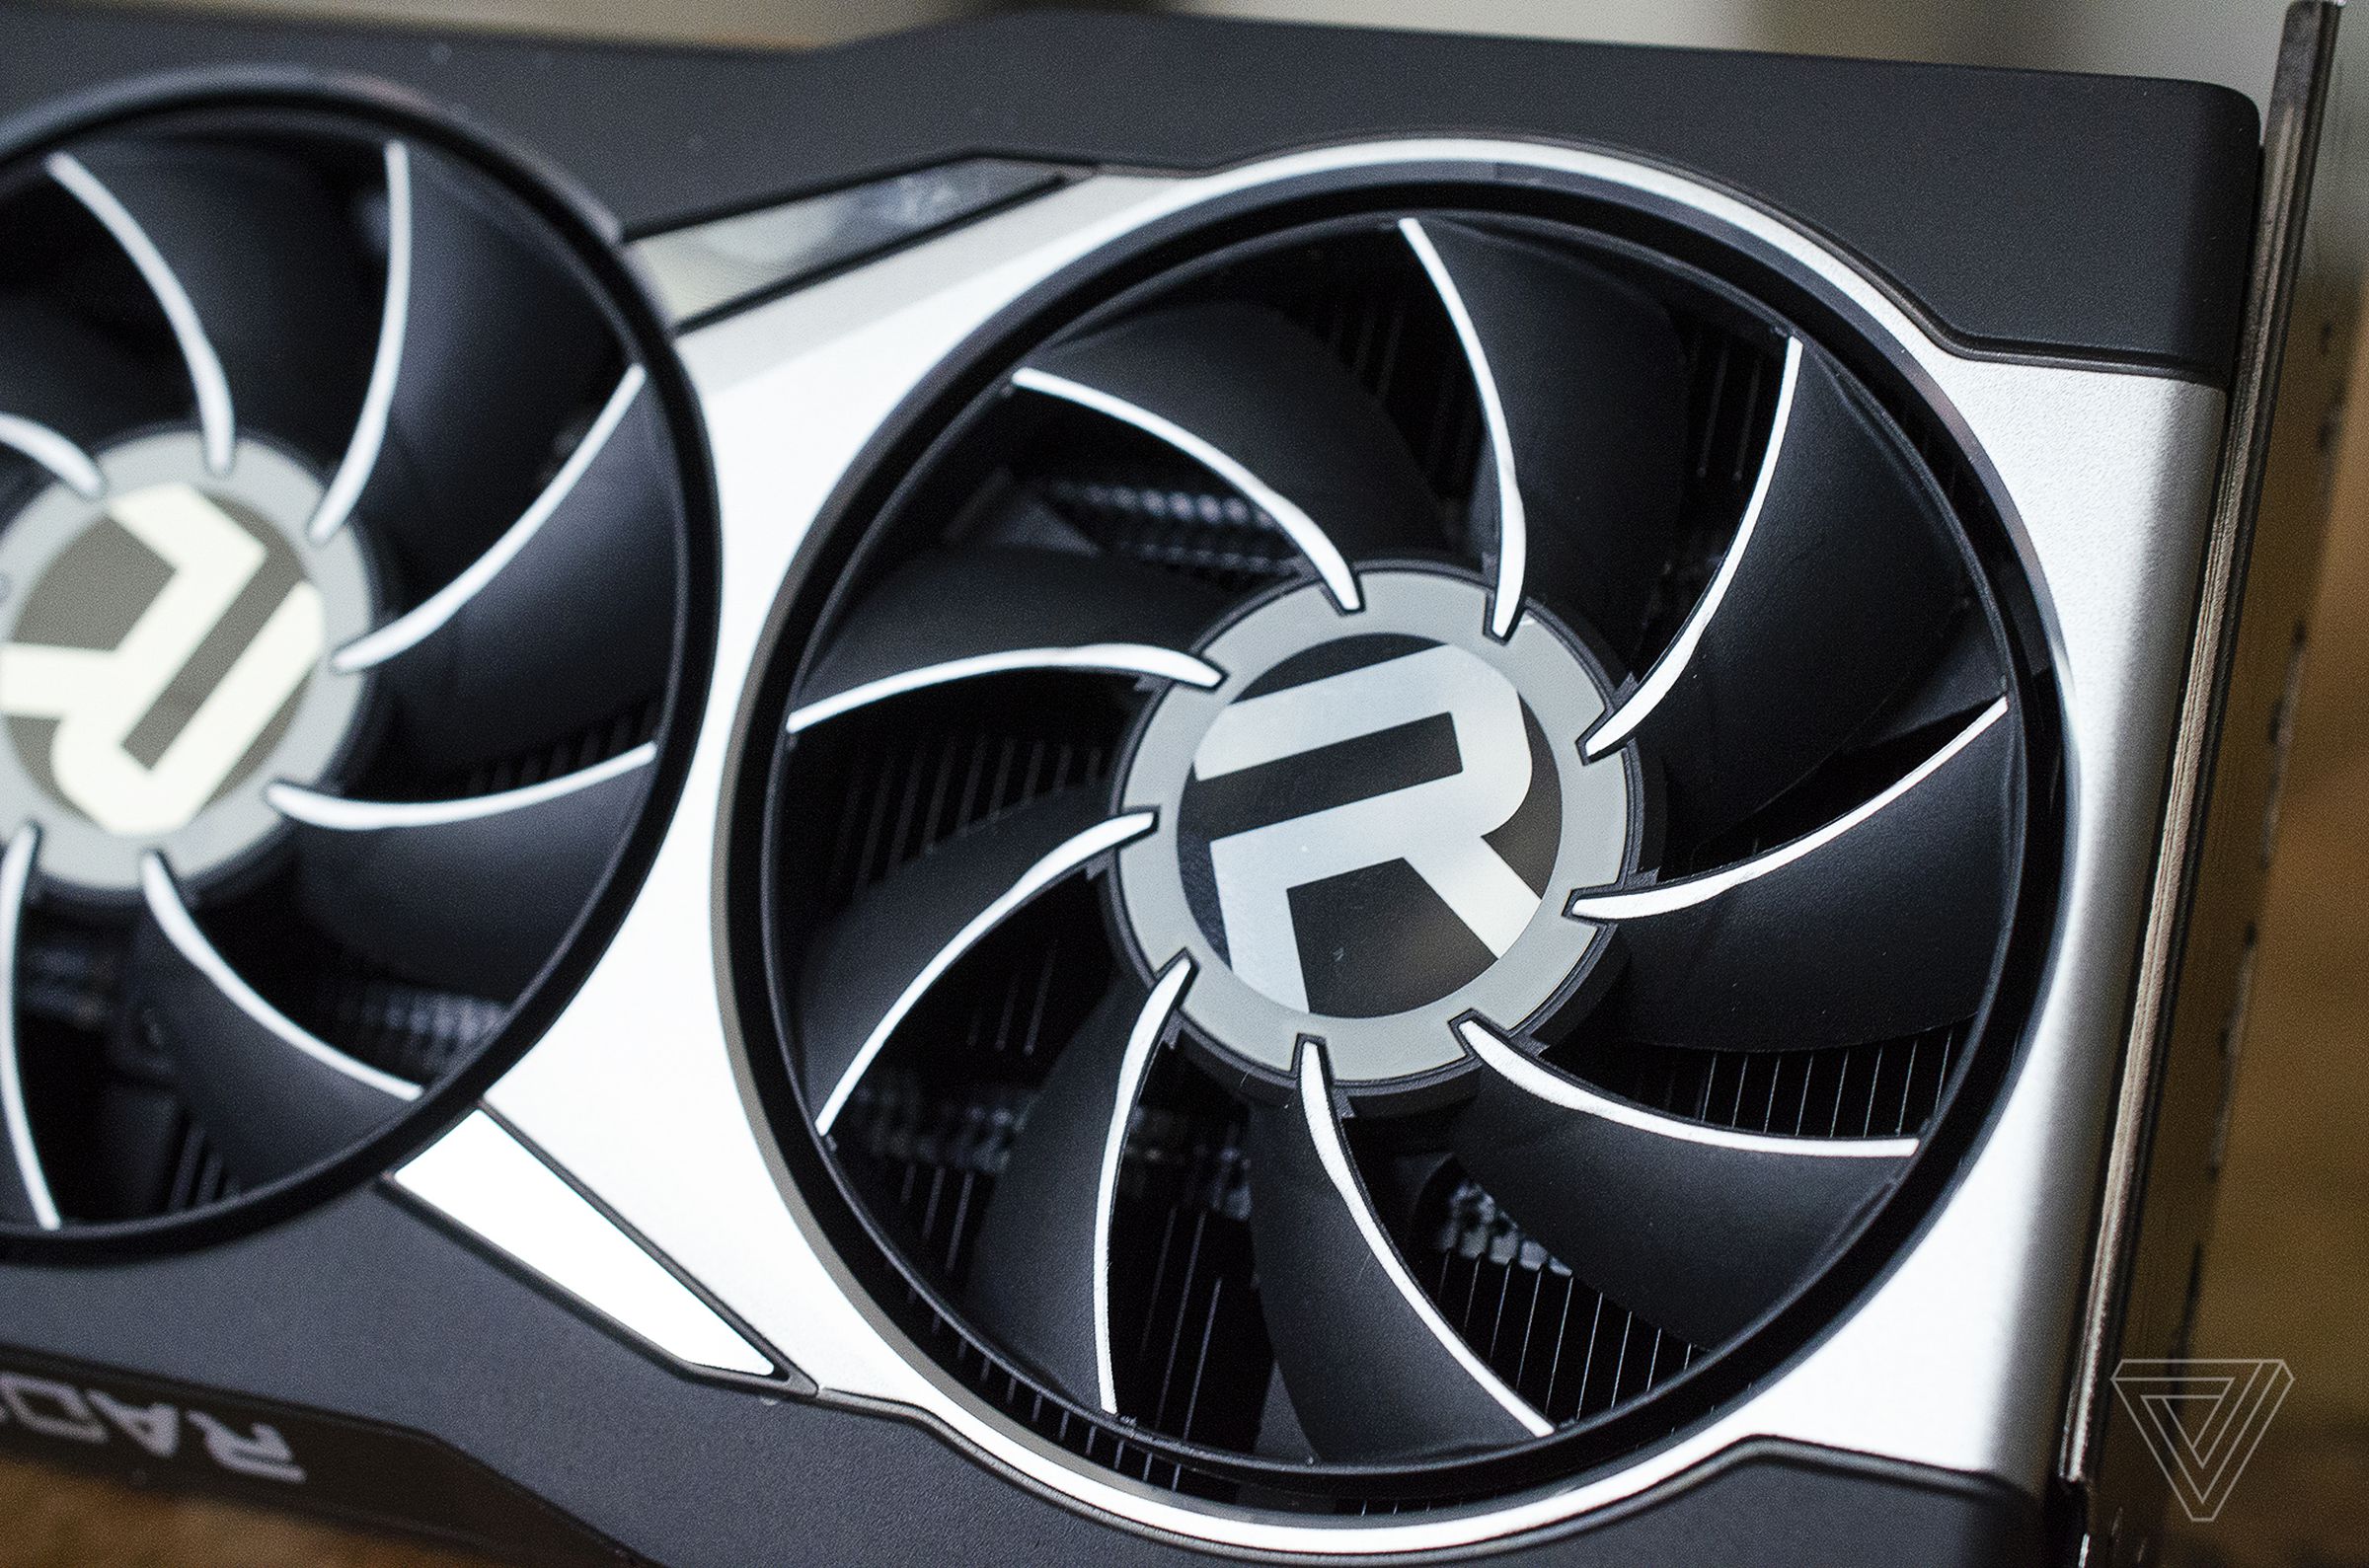 The Radeon RX 6800 XT’s fans help keep the card cool.